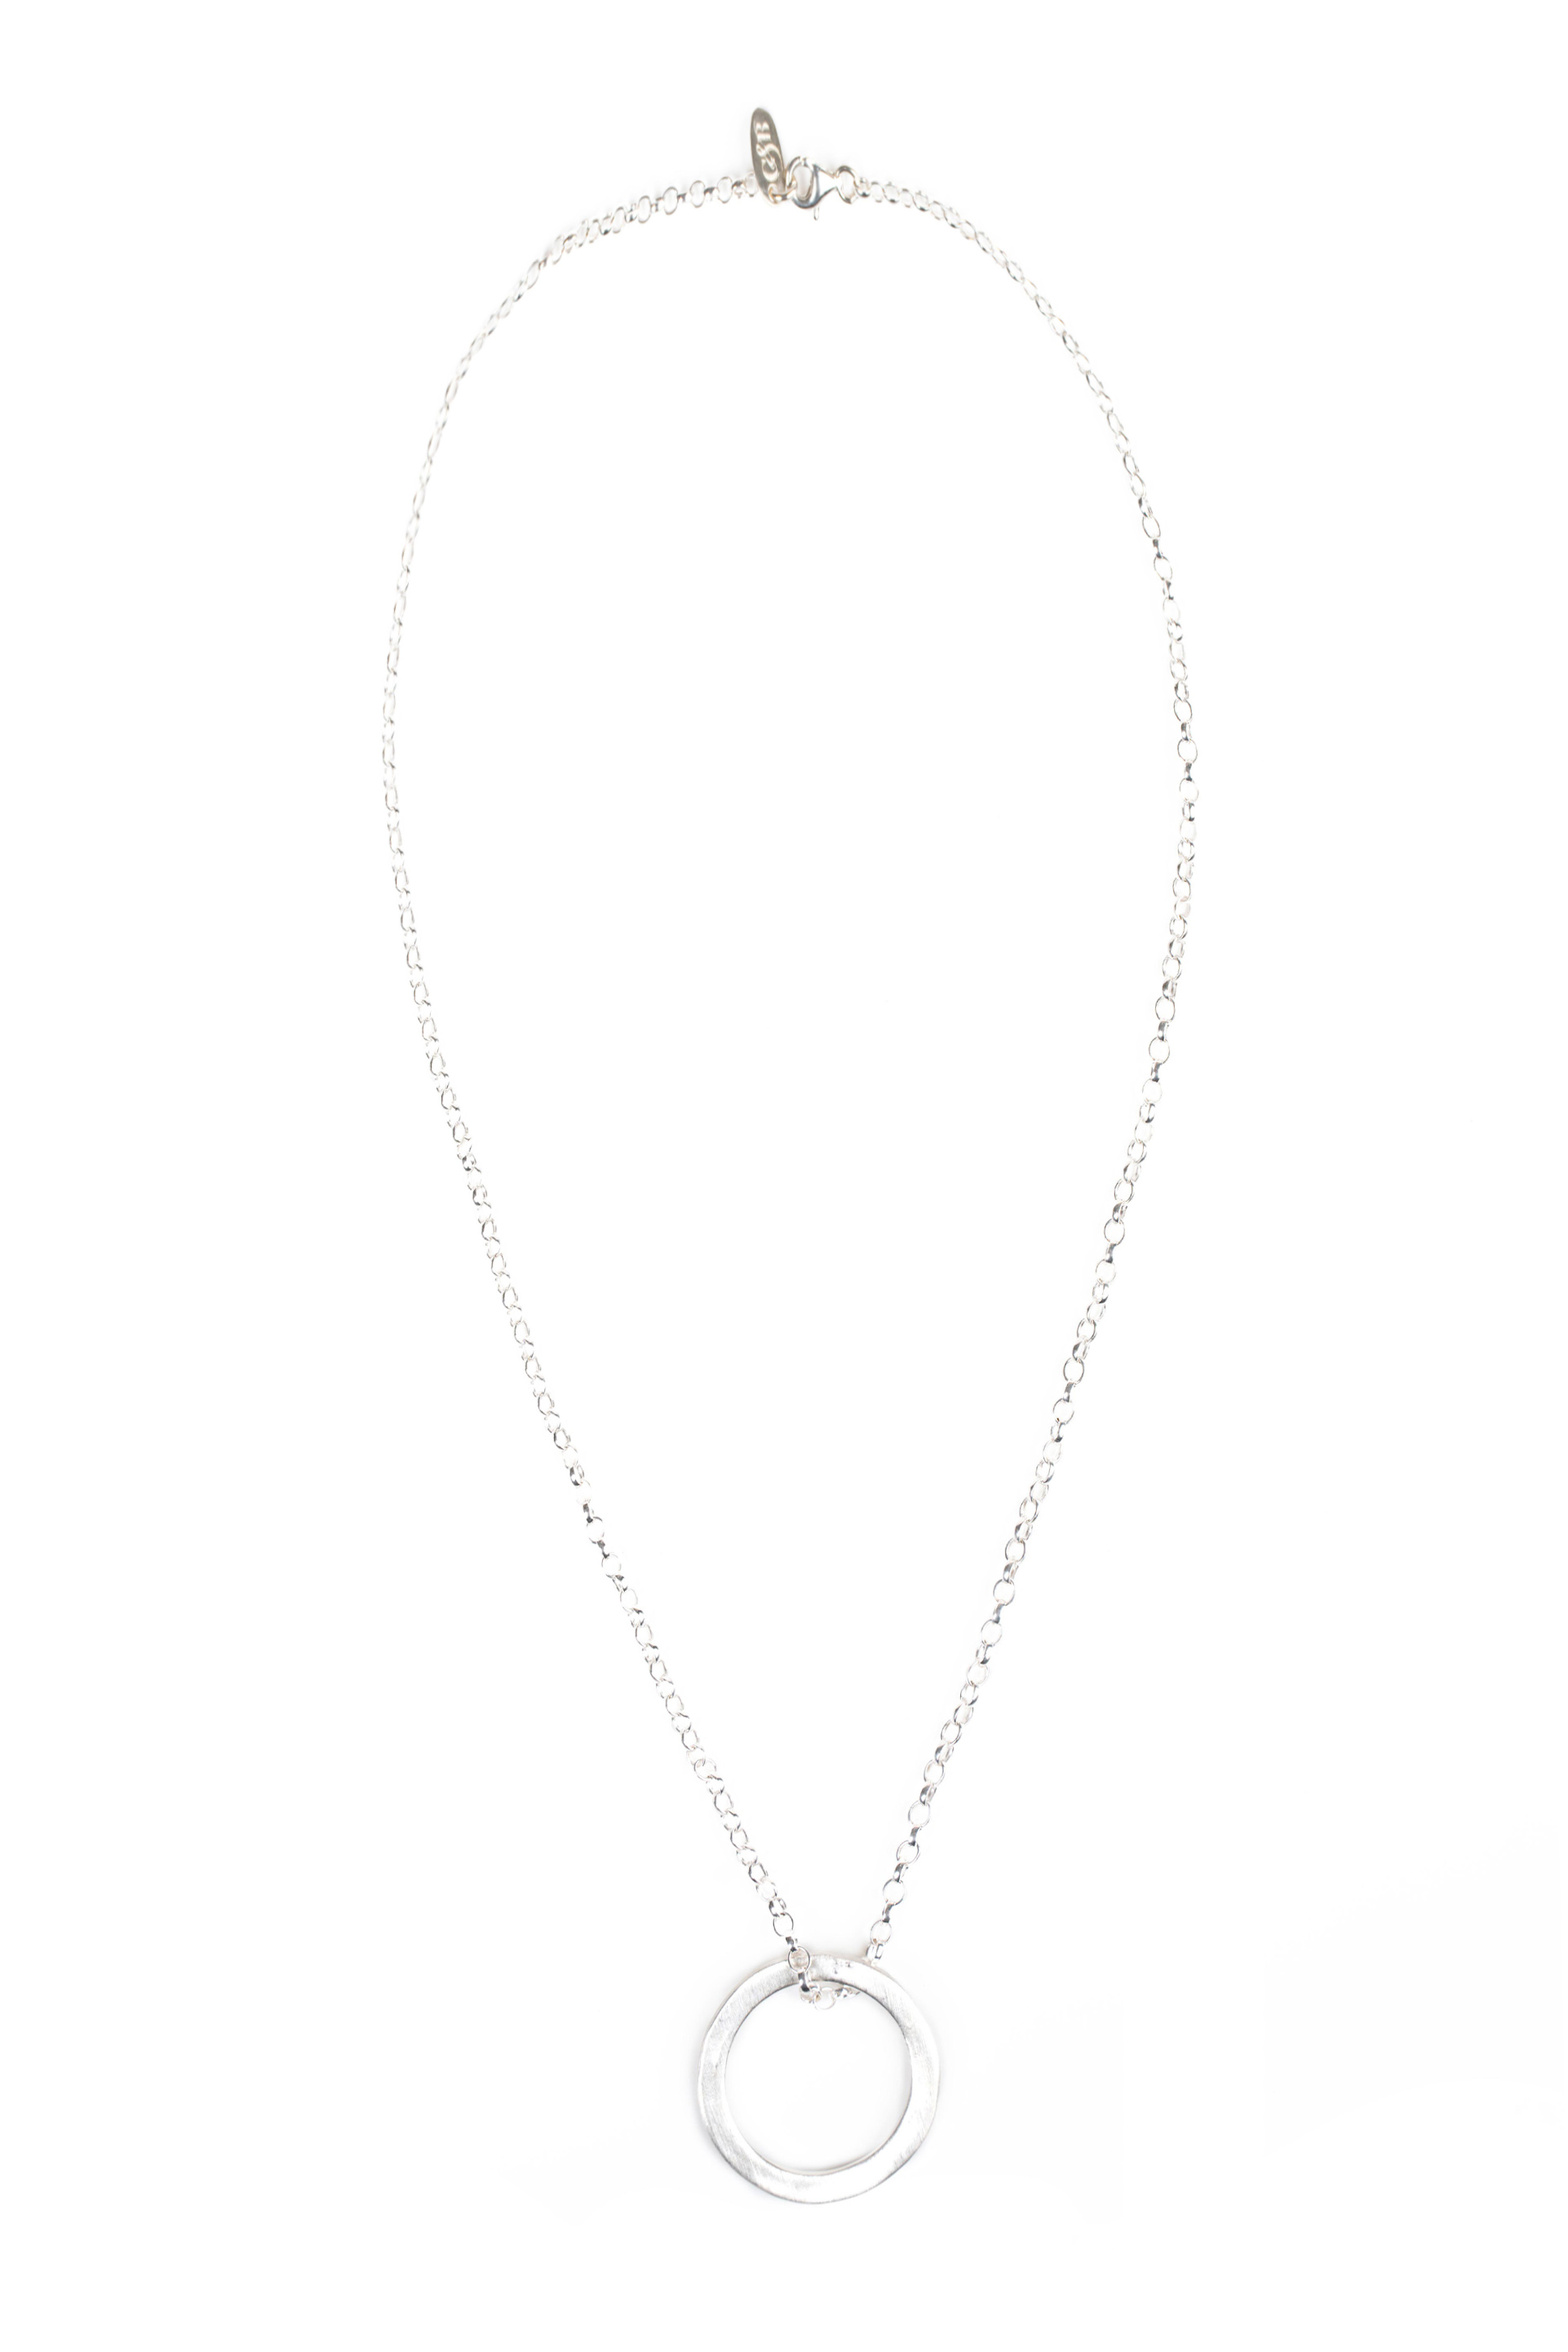 cb113_halonecklace_silver_whole_resized_edit.jpg